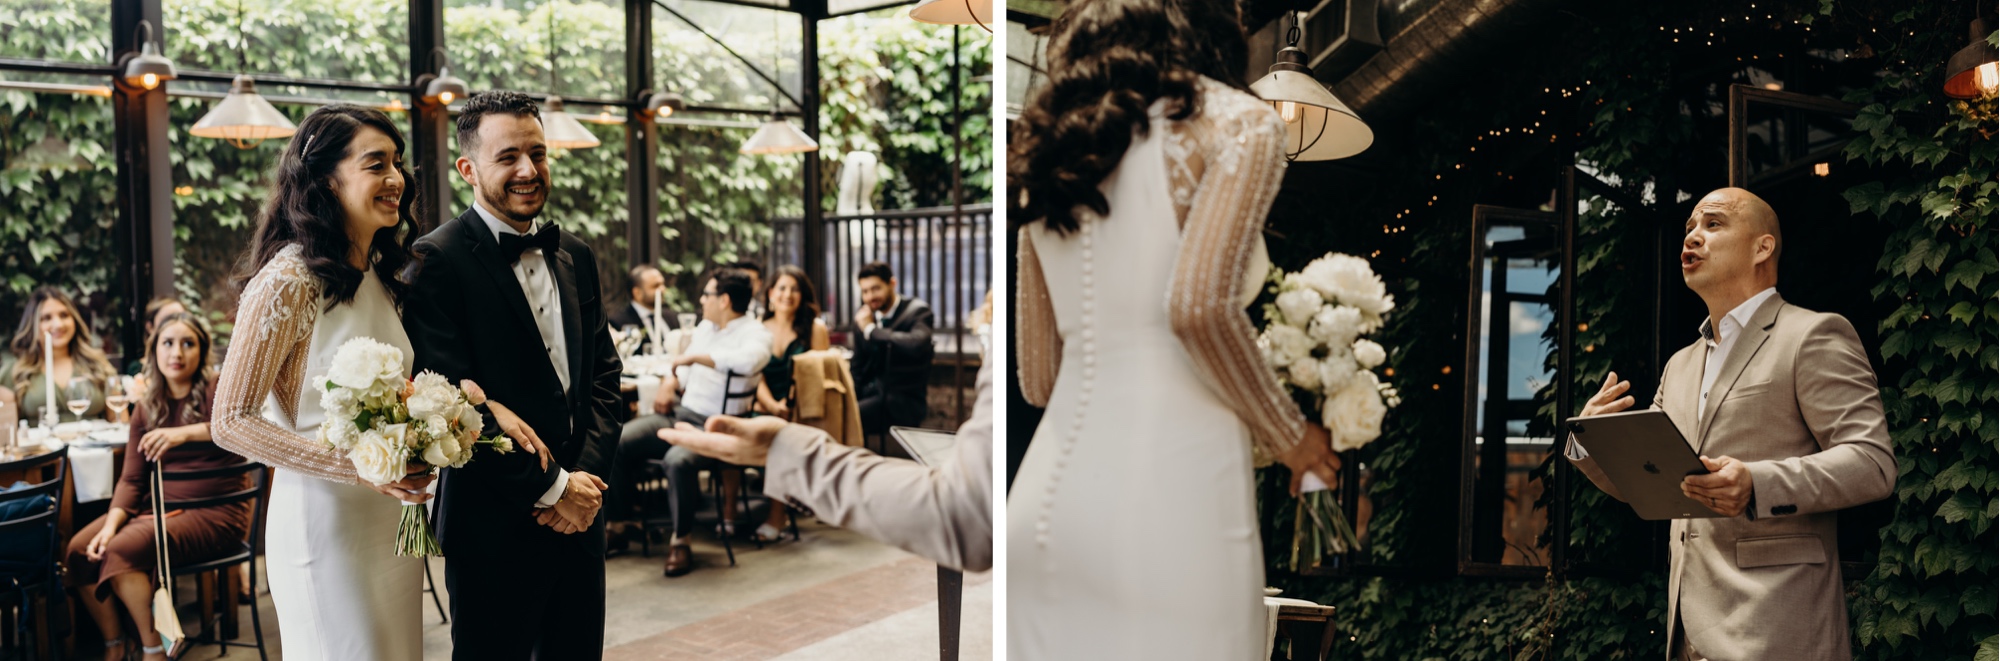 photo of a bride and groom and photo of an officiant speaking during their wedding ceremony at aurora brooklyn in new york city